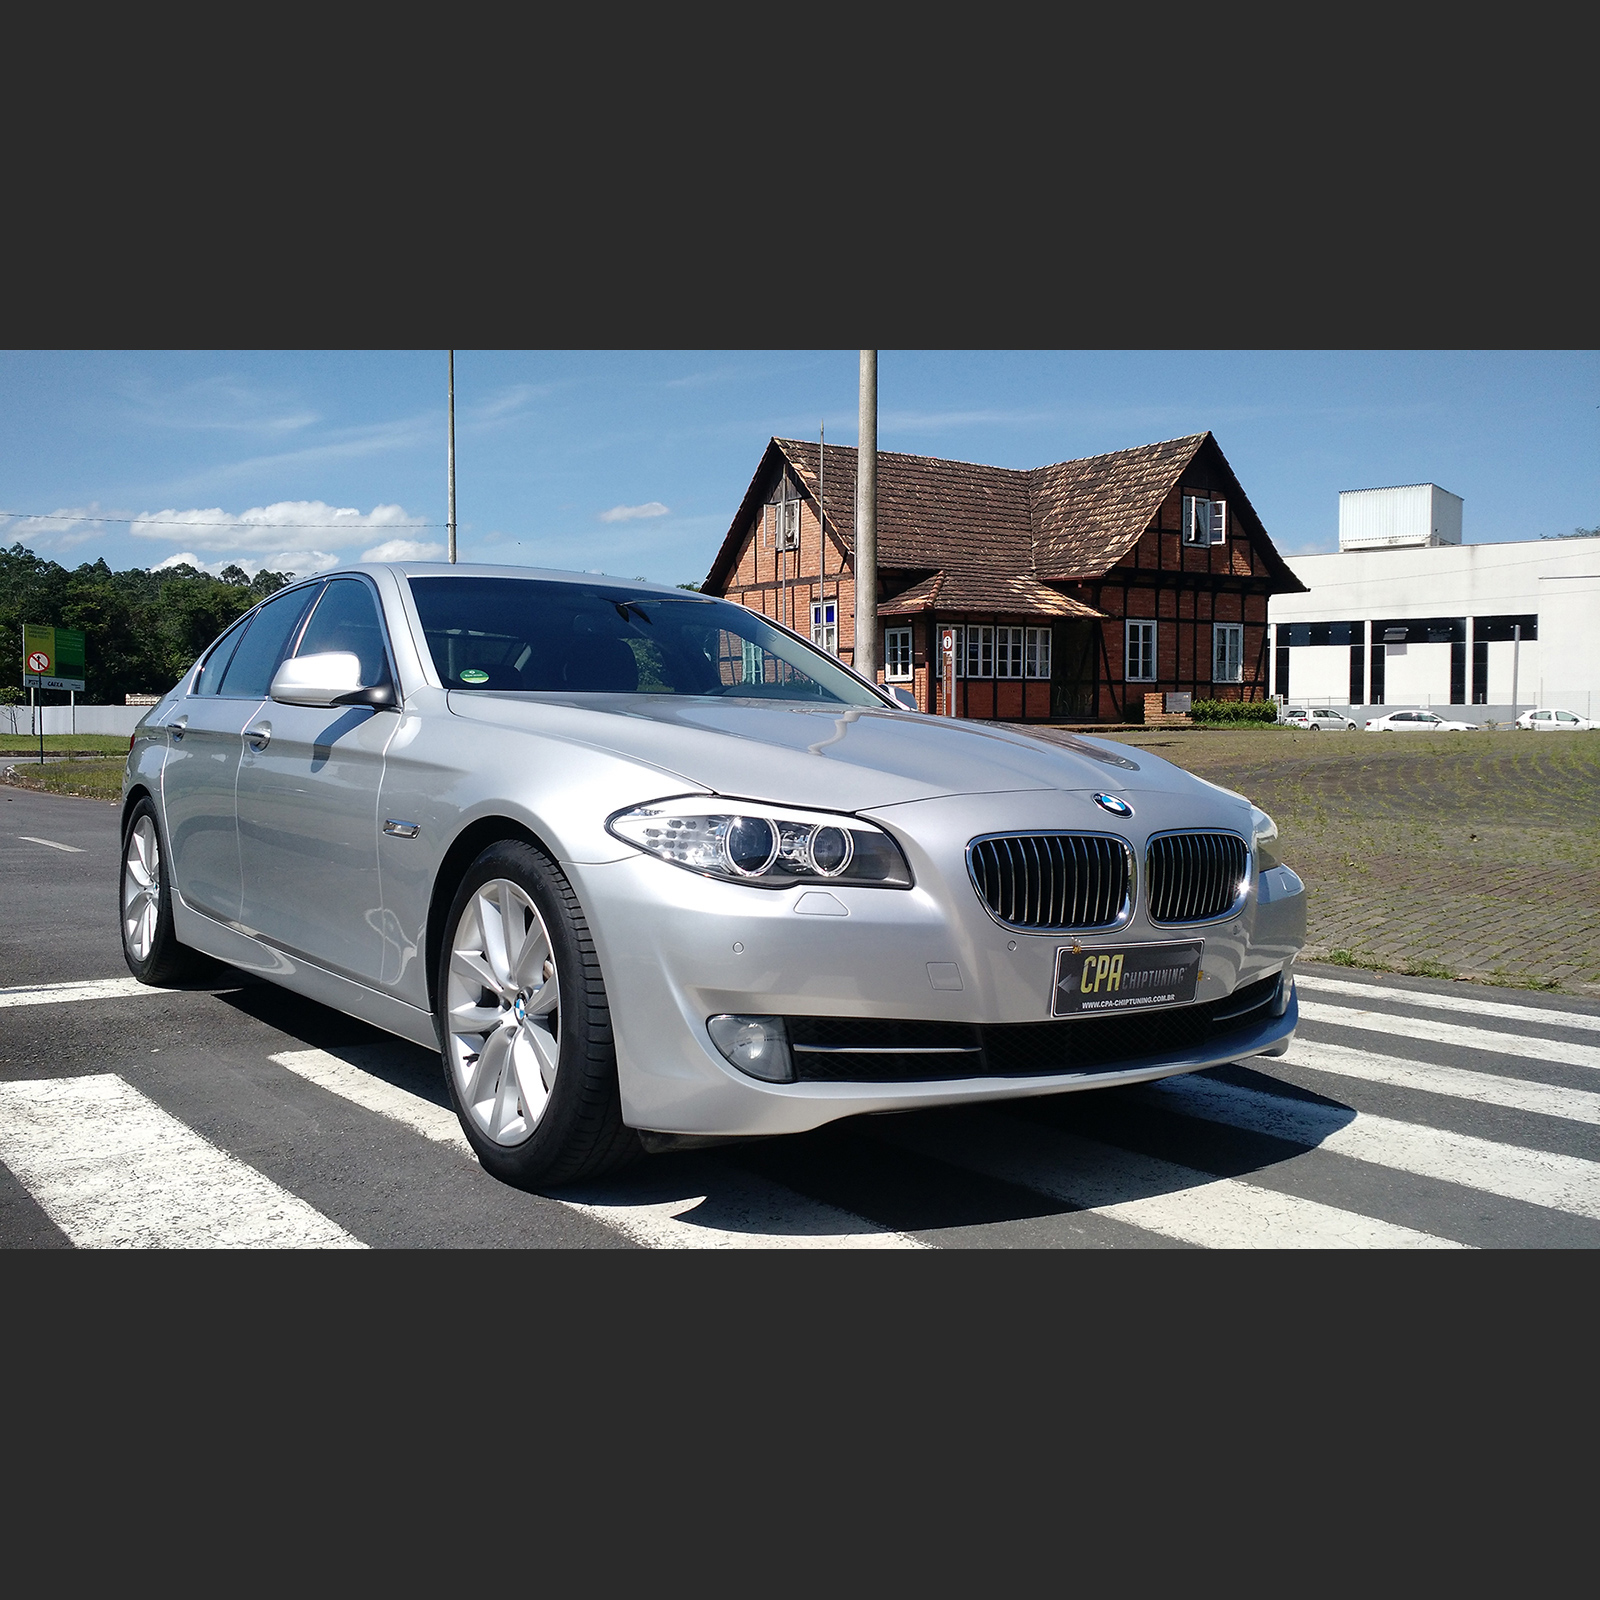 At the Test: BMW (F10) 550i